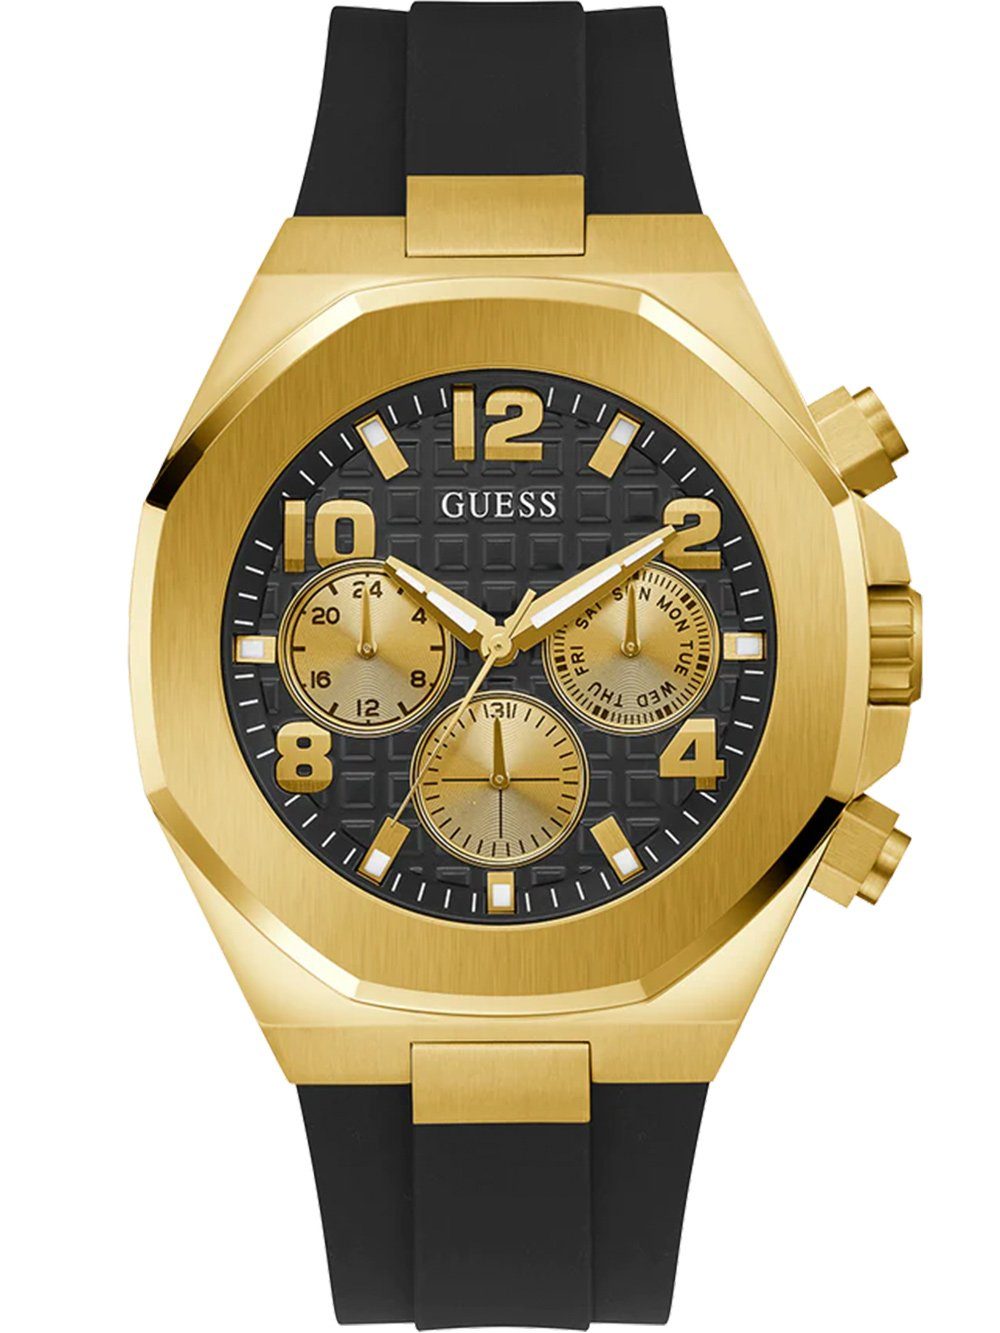 Guess Multifunktionsuhr Guess Empire 5ATM 46mm GW0583G2 Herrenuhr